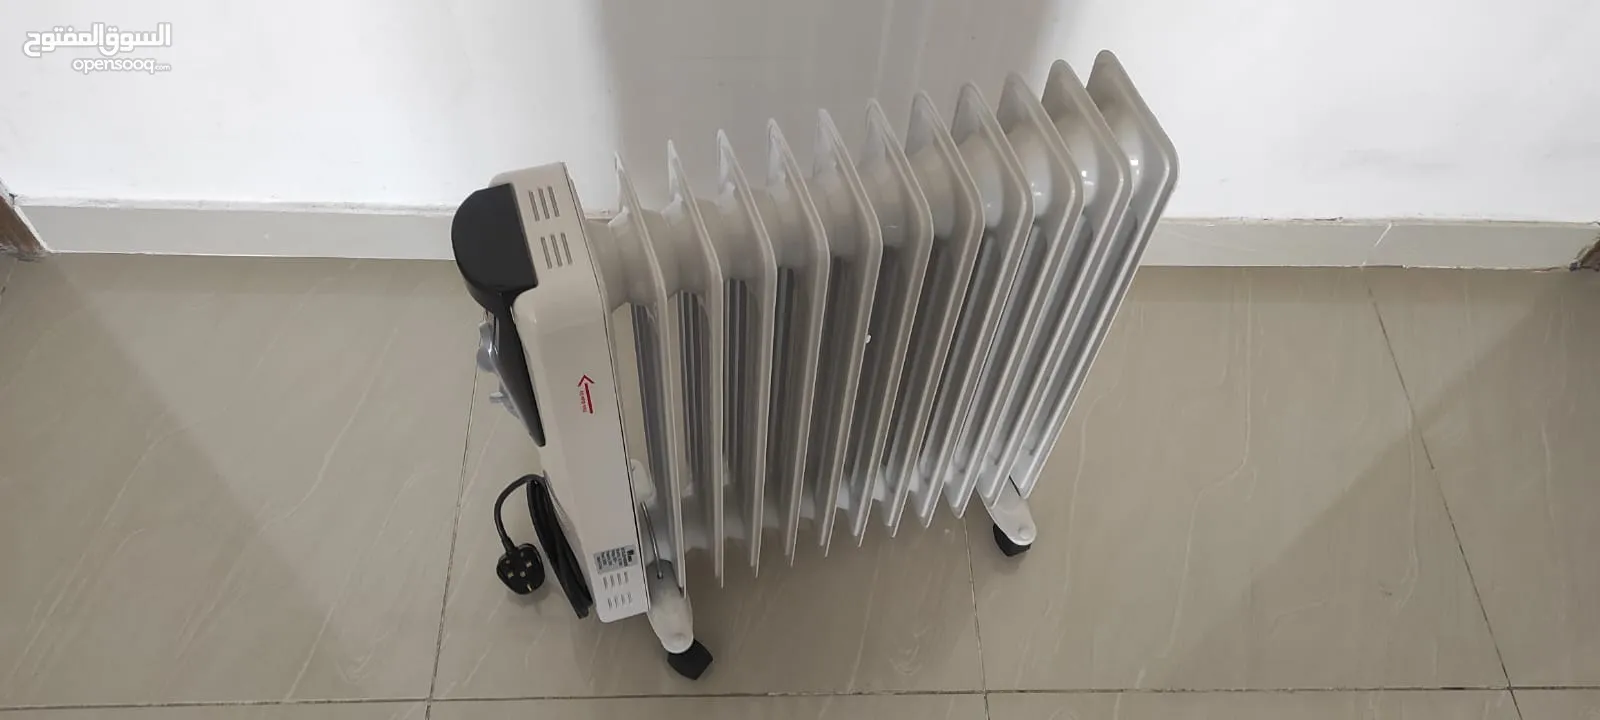 WANSA Oil heater and Butterfly sewing machine